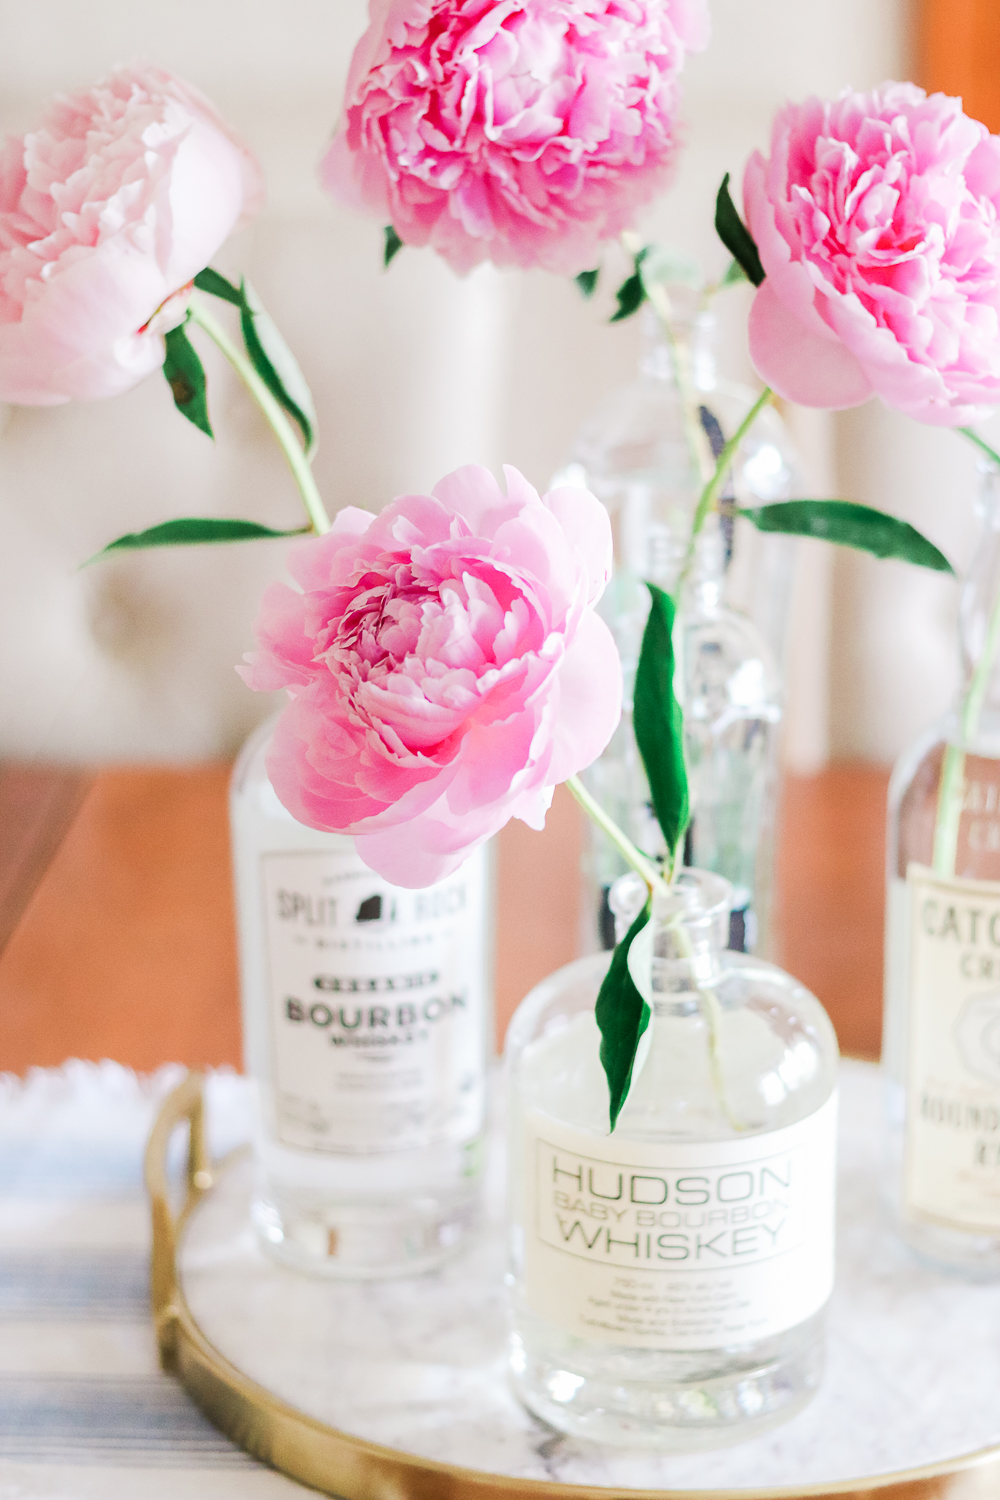 DIY Peony Centerpiece by popular southern lifestyle blogger Stephanie Ziajka on Diary of a Debutante, rustic centerpiece idea with peonies, minimalist rustic flower arrangement with peonies, cheap wedding table centerpieces, rustic home decor ideas